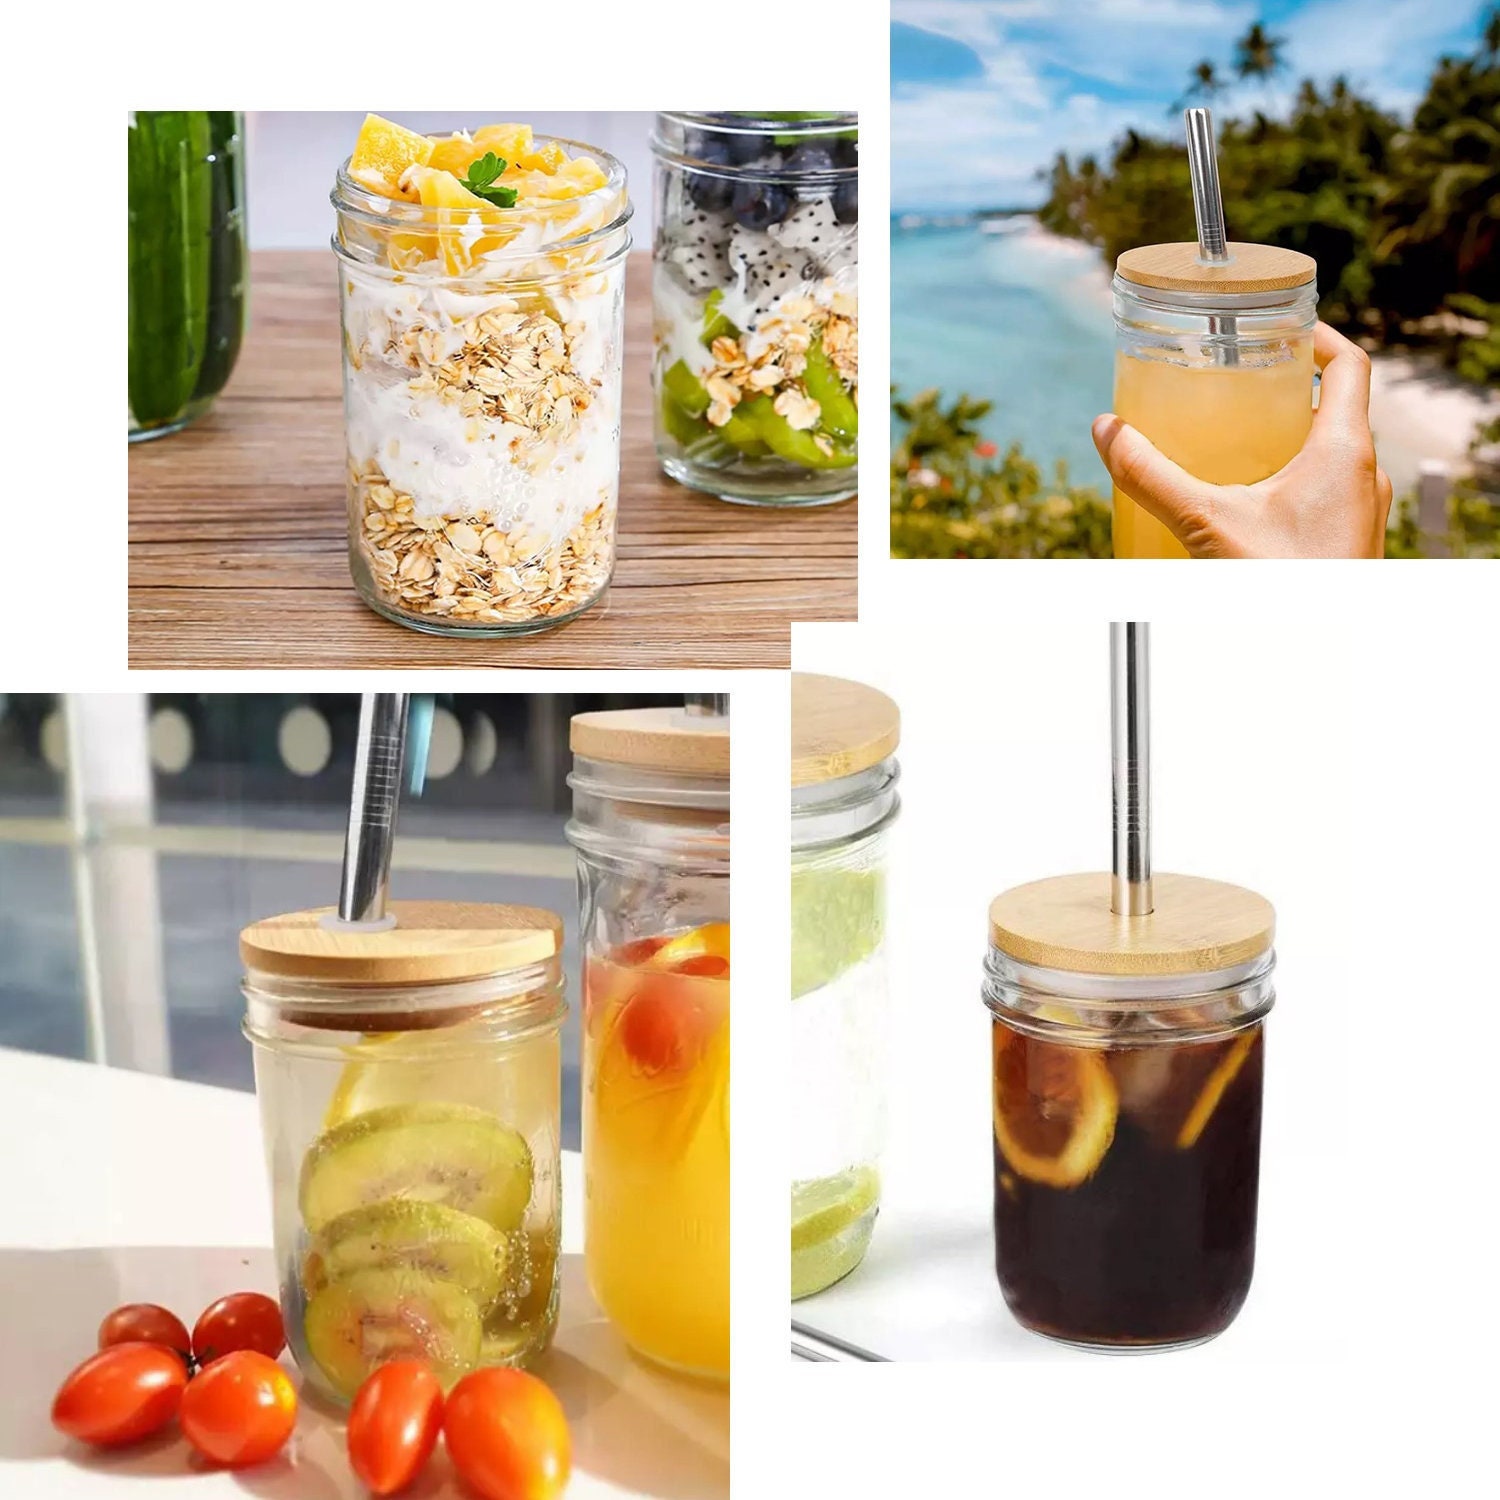  Benestanti 4 pcs 24 oz Glass Cups With Bamboo Lids and  Straws,Reusable Boba Cup Smoothie Cup Iced Coffee Cups with Lids Glass  Tumbler with Straw and Lid,Drinking Jars for Bubble Tea,Juice,Gift 